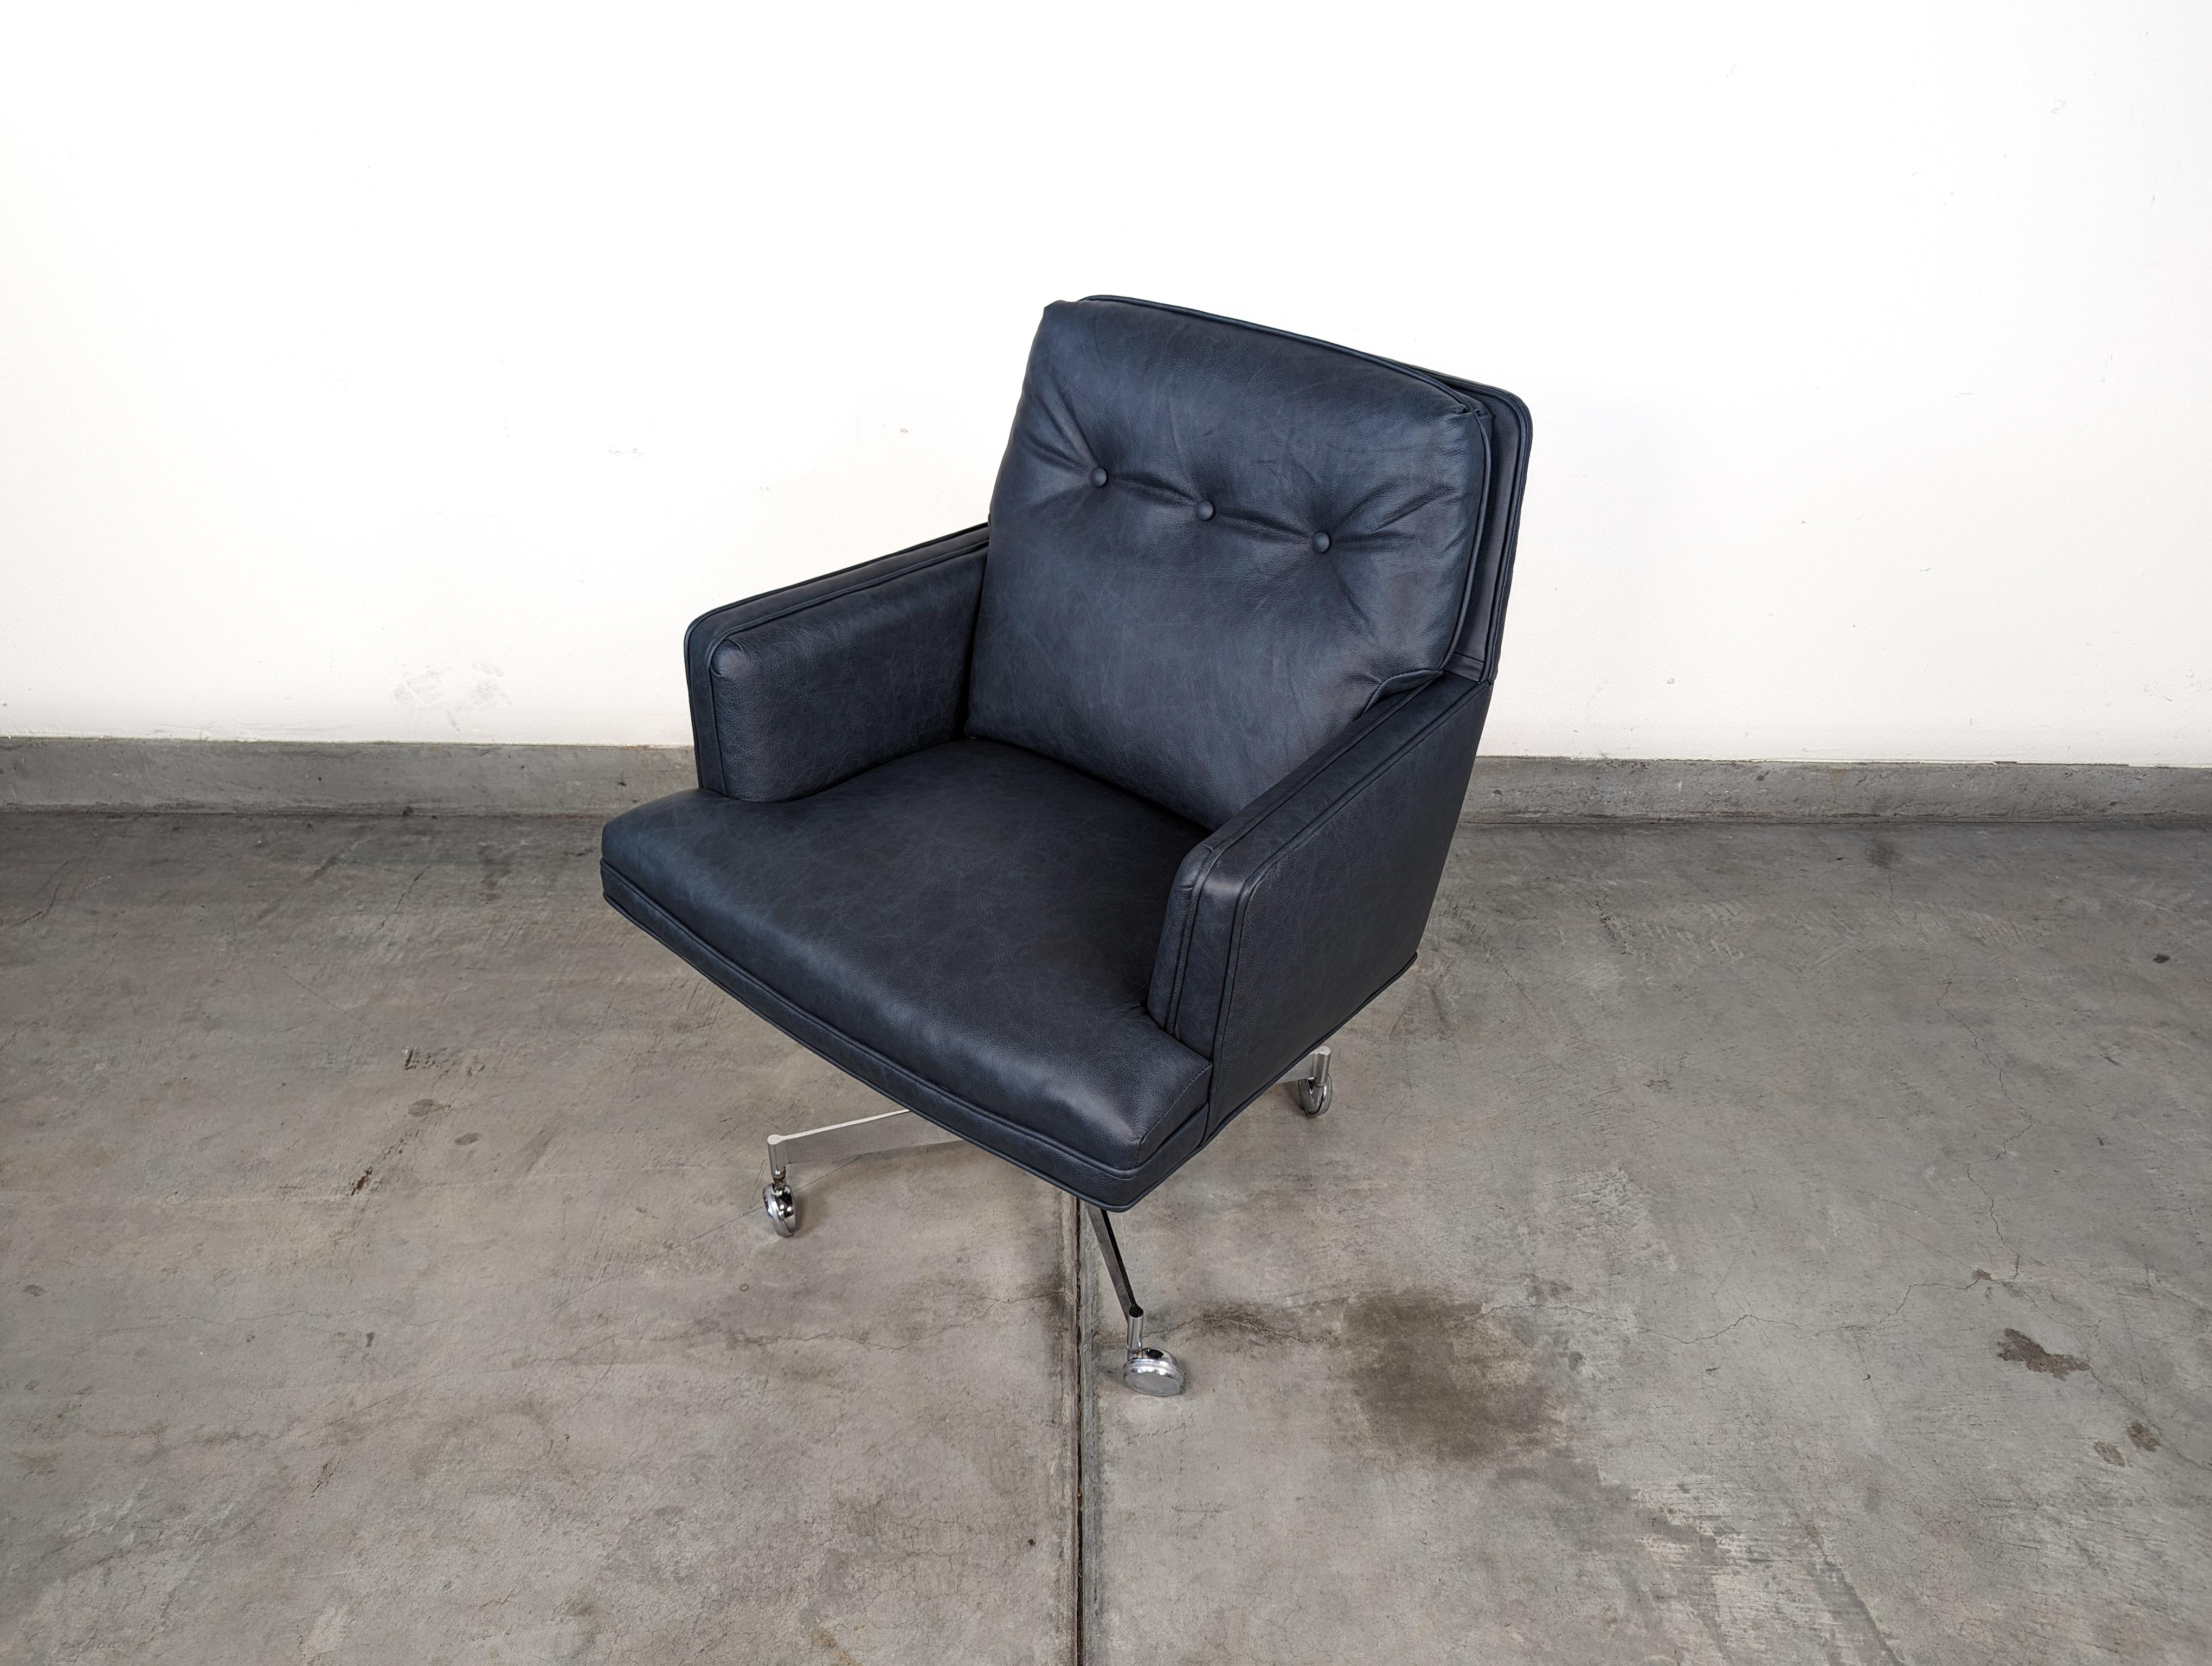 Discover the pinnacle of mid-century design with this exquisite Executive Swivel Office Chair by Edward Wormley for Dunbar, a testament to the era's innovation and Wormley's enduring influence on modern furniture design. Designed in the 1950s, this